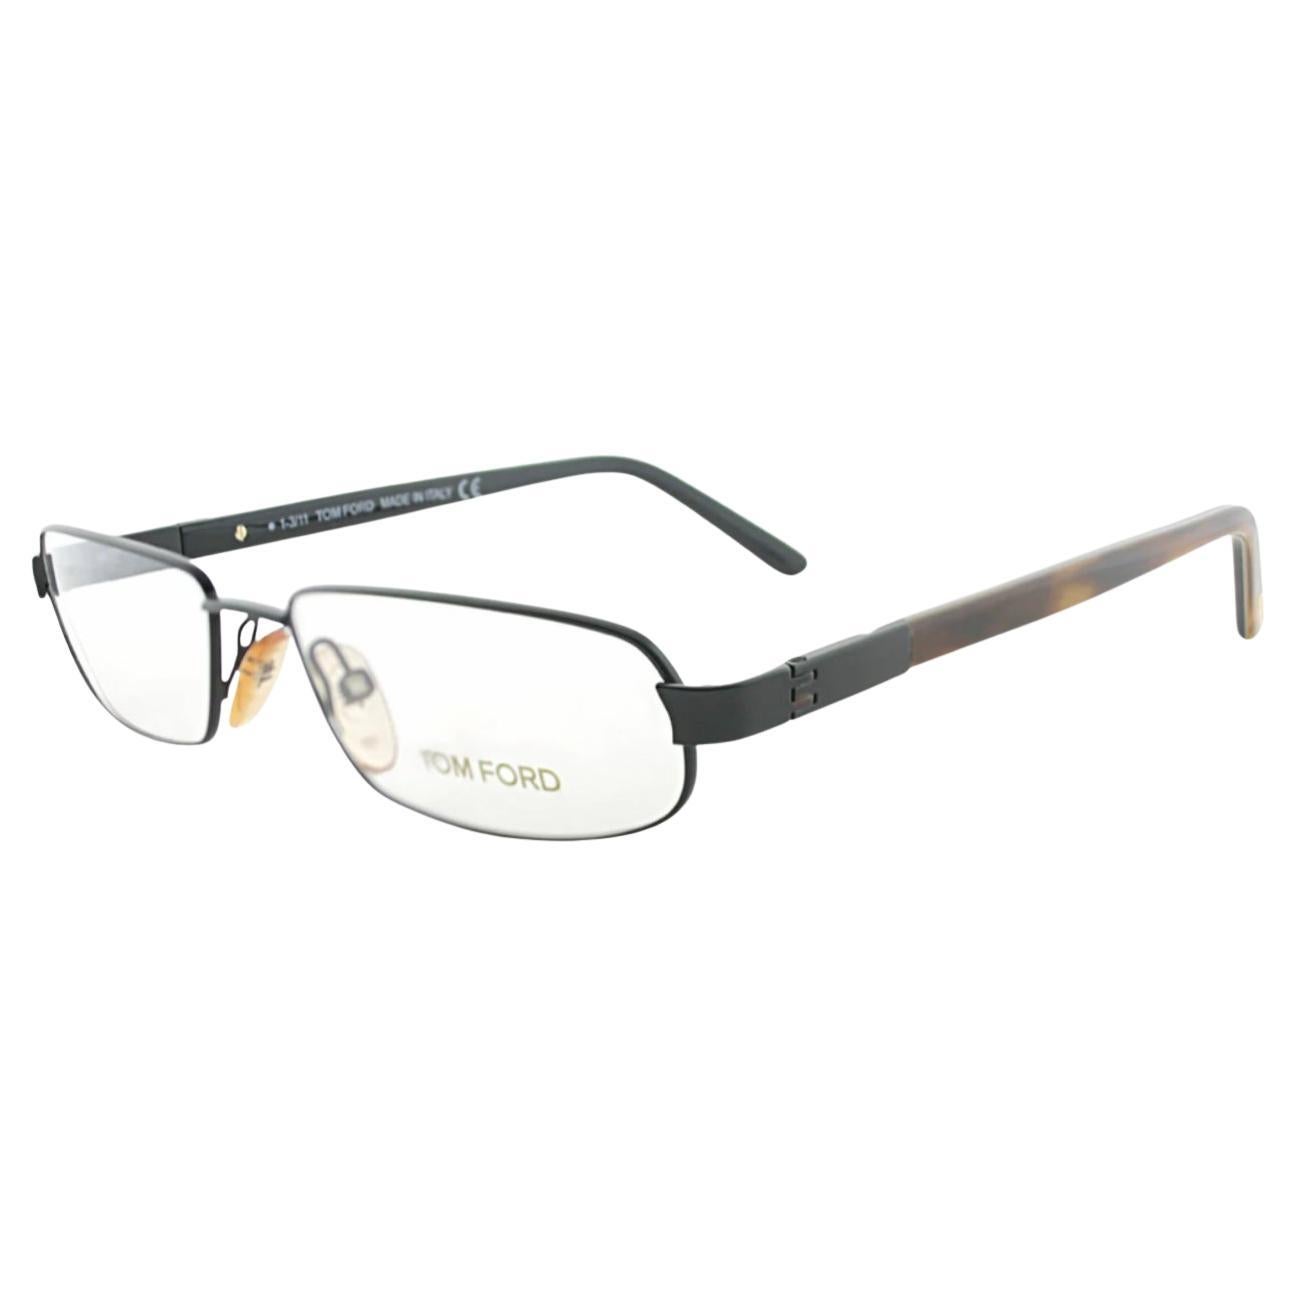 Tom Ford FT 5056 Rectangle Eyeglasses Solstice Sunglasses With Box